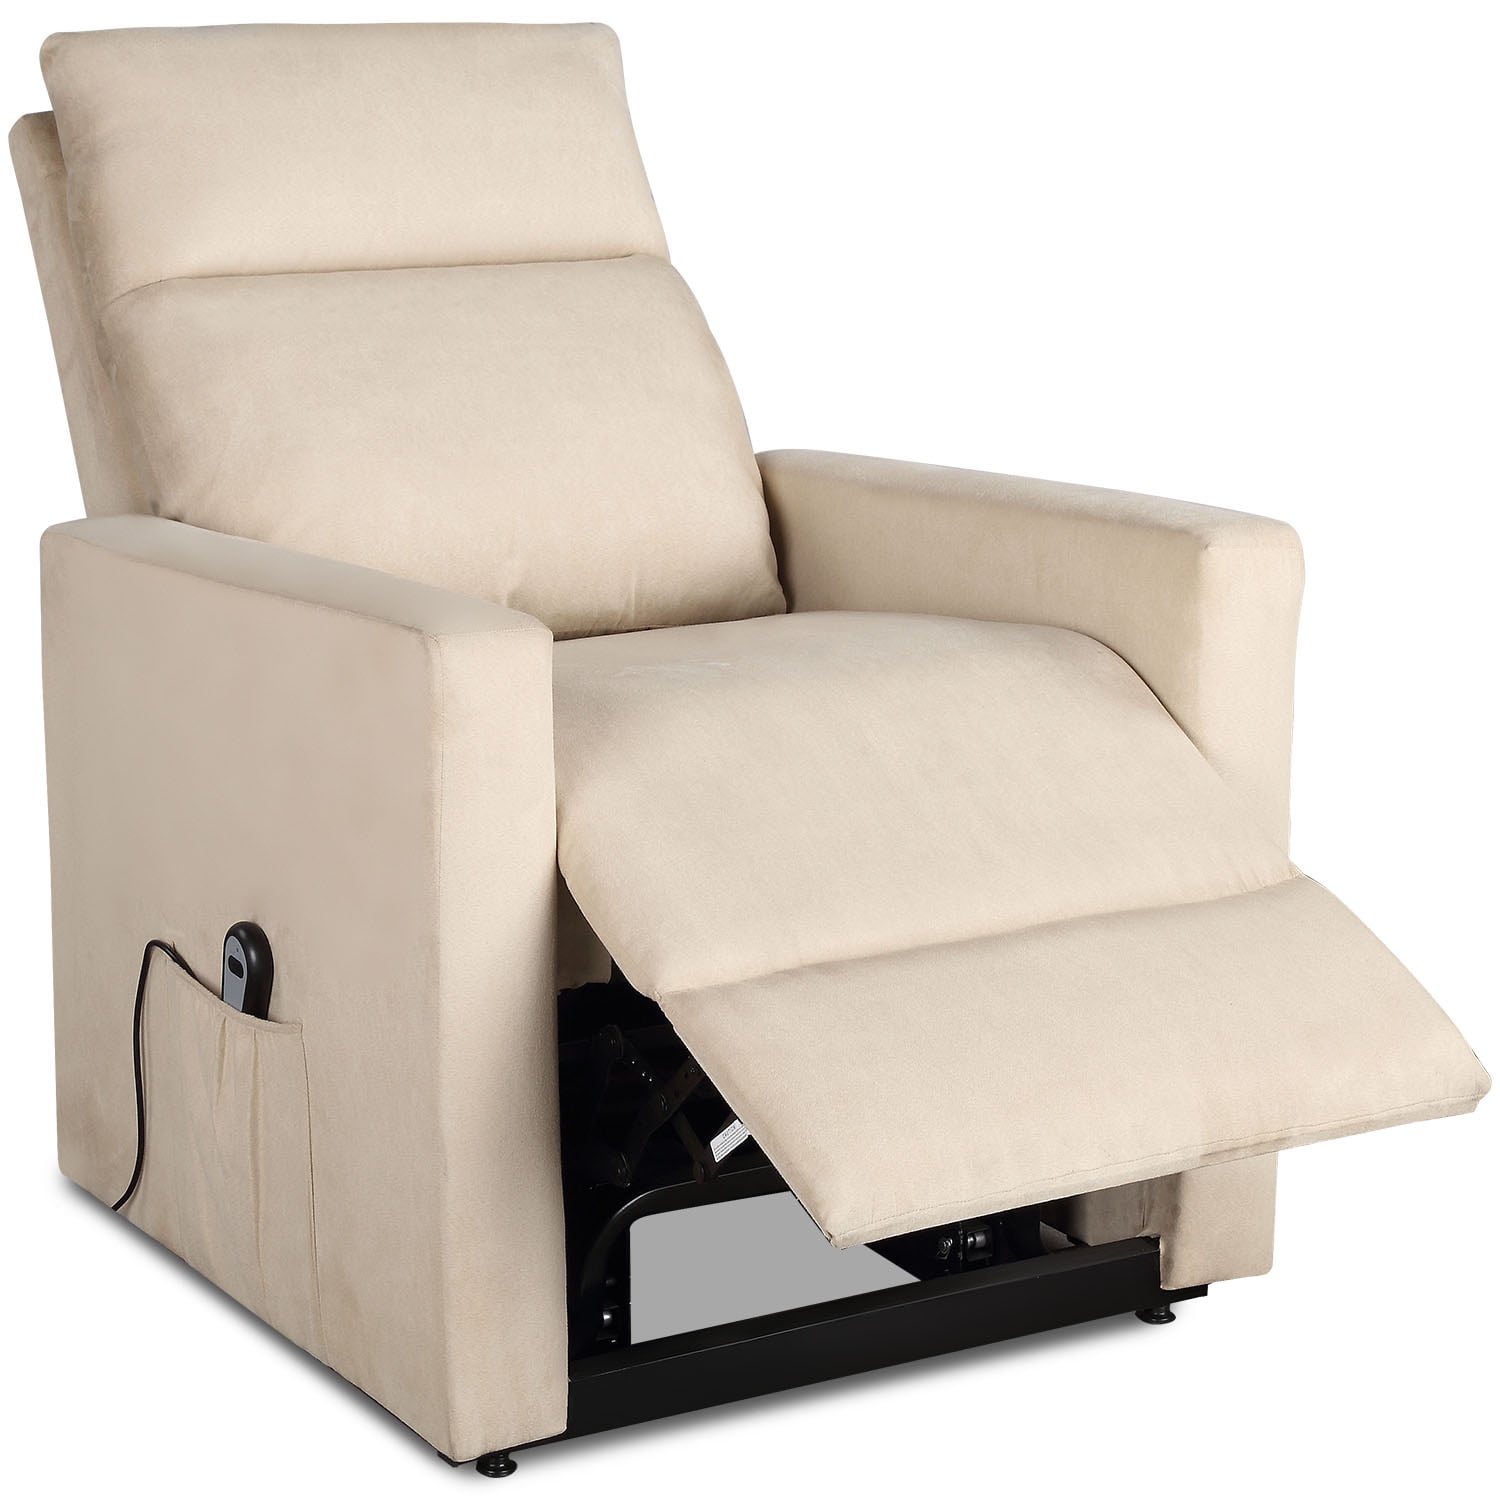 clearance lift power lift recliner chair with wired controller segmart  upholstered fabric modern recliner chair lounger sofa seat club chair for